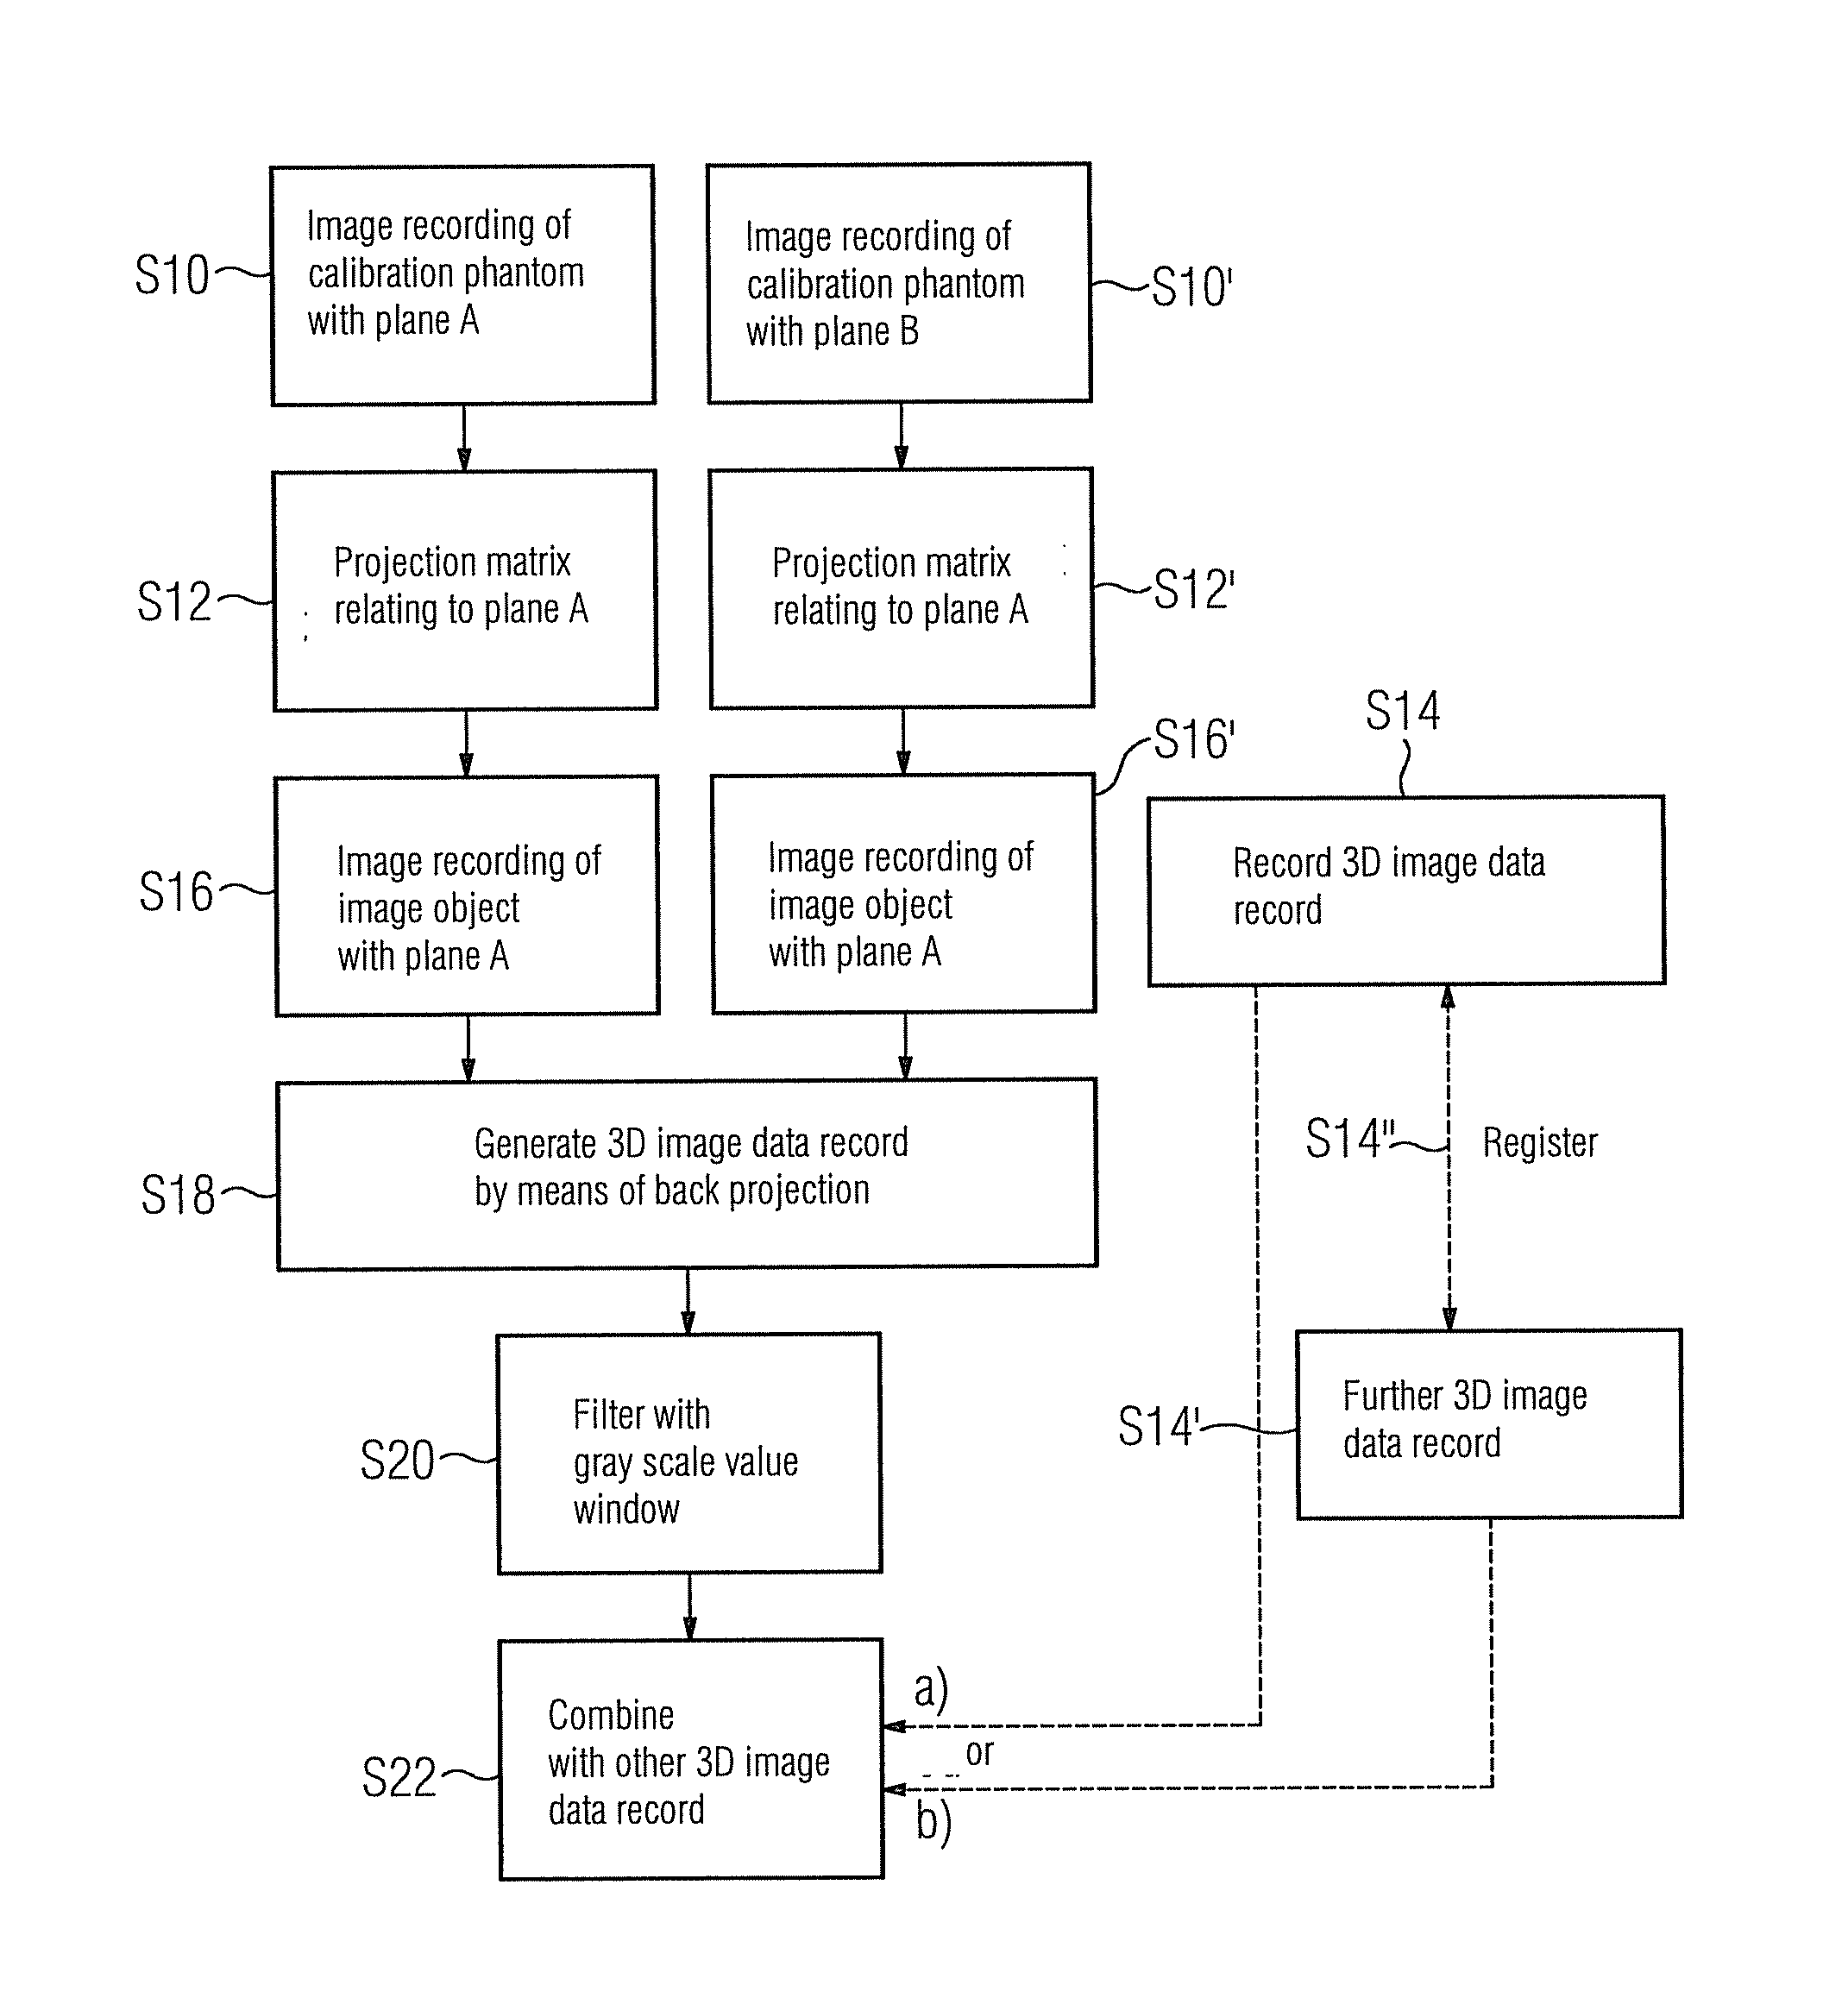 Method for providing a 3D image data record of a physiological object with a metal object therein